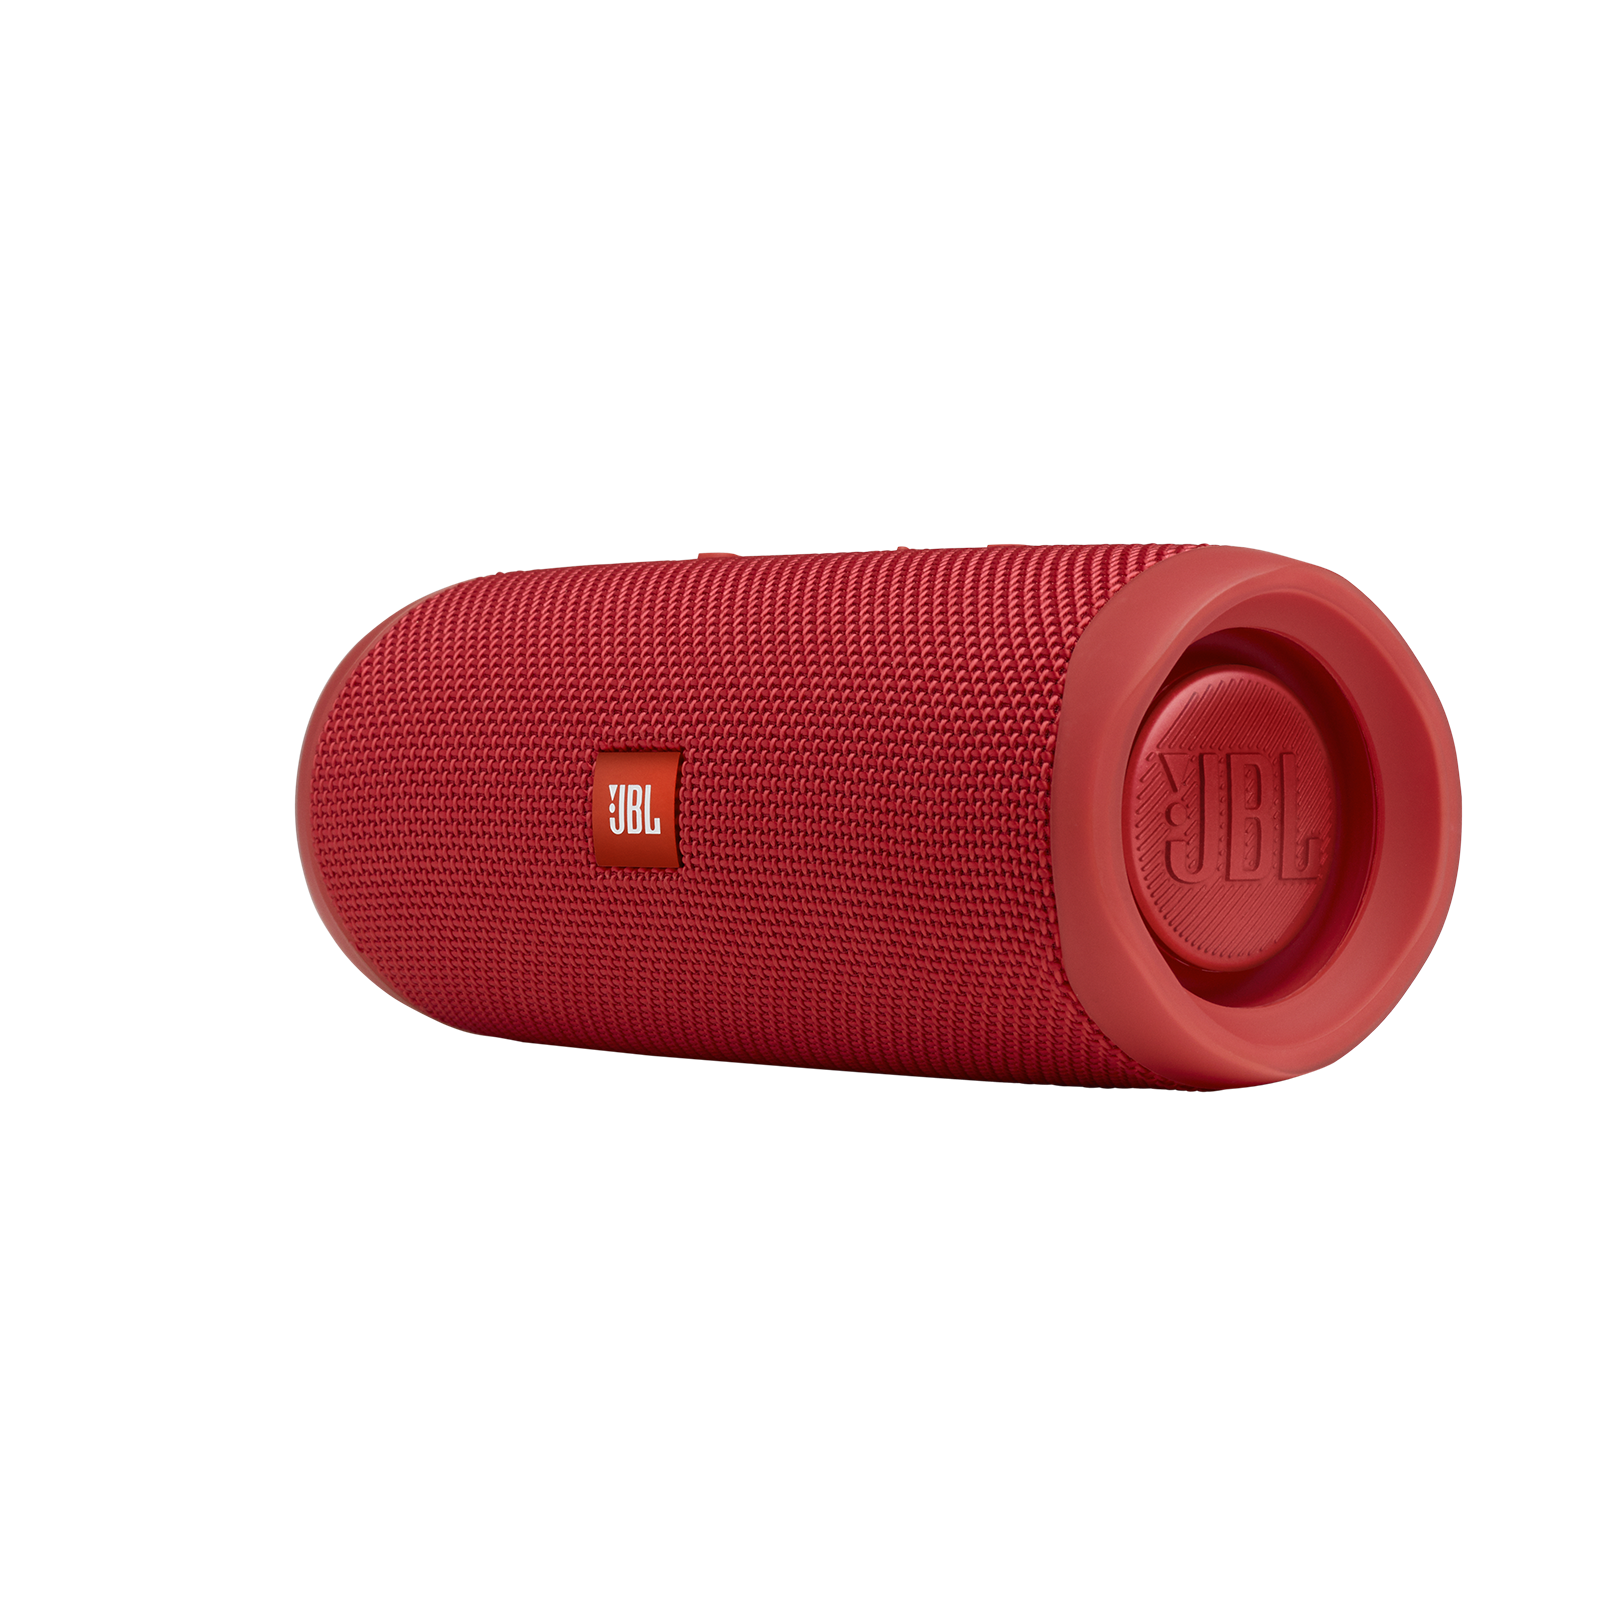 jbl charge 4 firmware update 3.0 changes